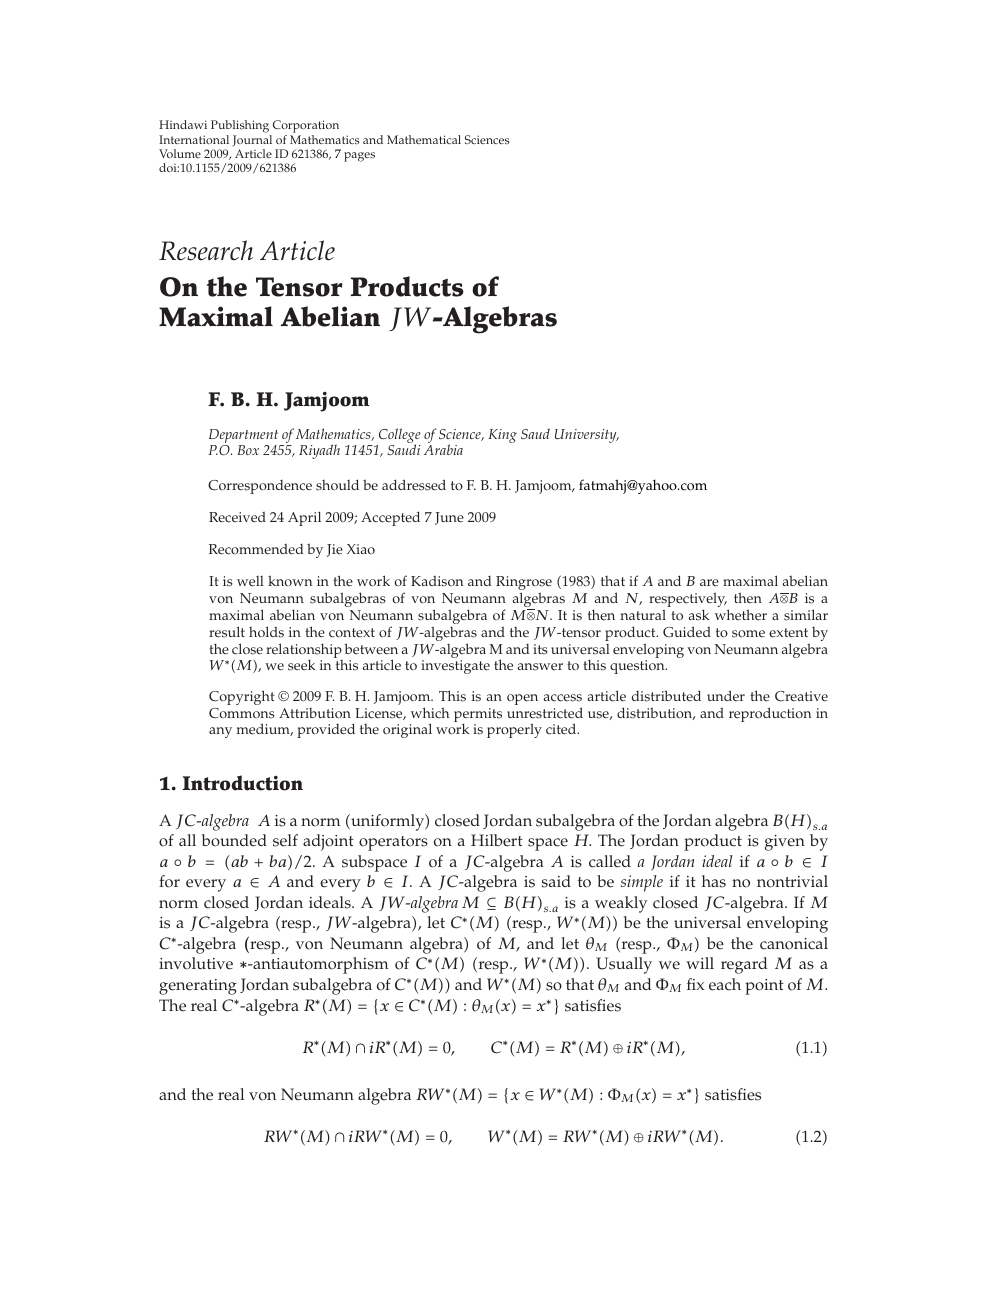 On The Tensor Products Of Maximal Abelian Jw Algebras Topic Of Research Paper In Mathematics Download Scholarly Article Pdf And Read For Free On Cyberleninka Open Science Hub